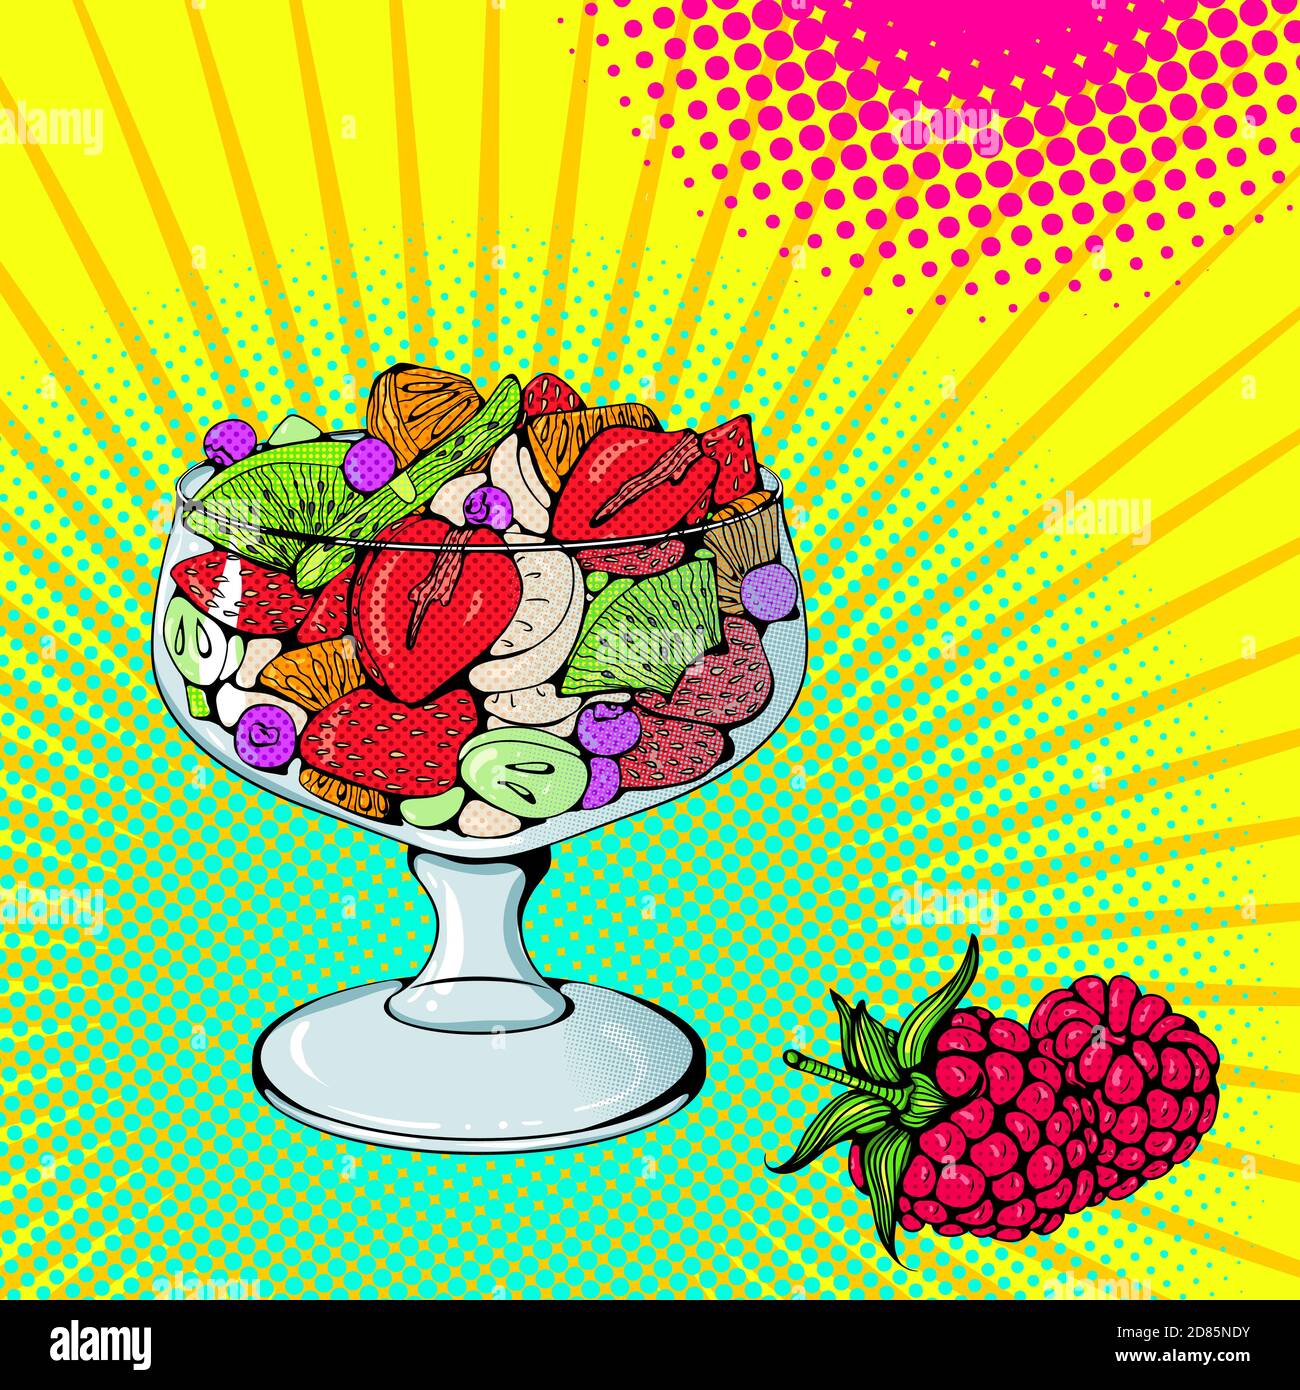 Vector bright colored background in Pop Art style. Illustration with fruit salad. Retro comic style Stock Vector